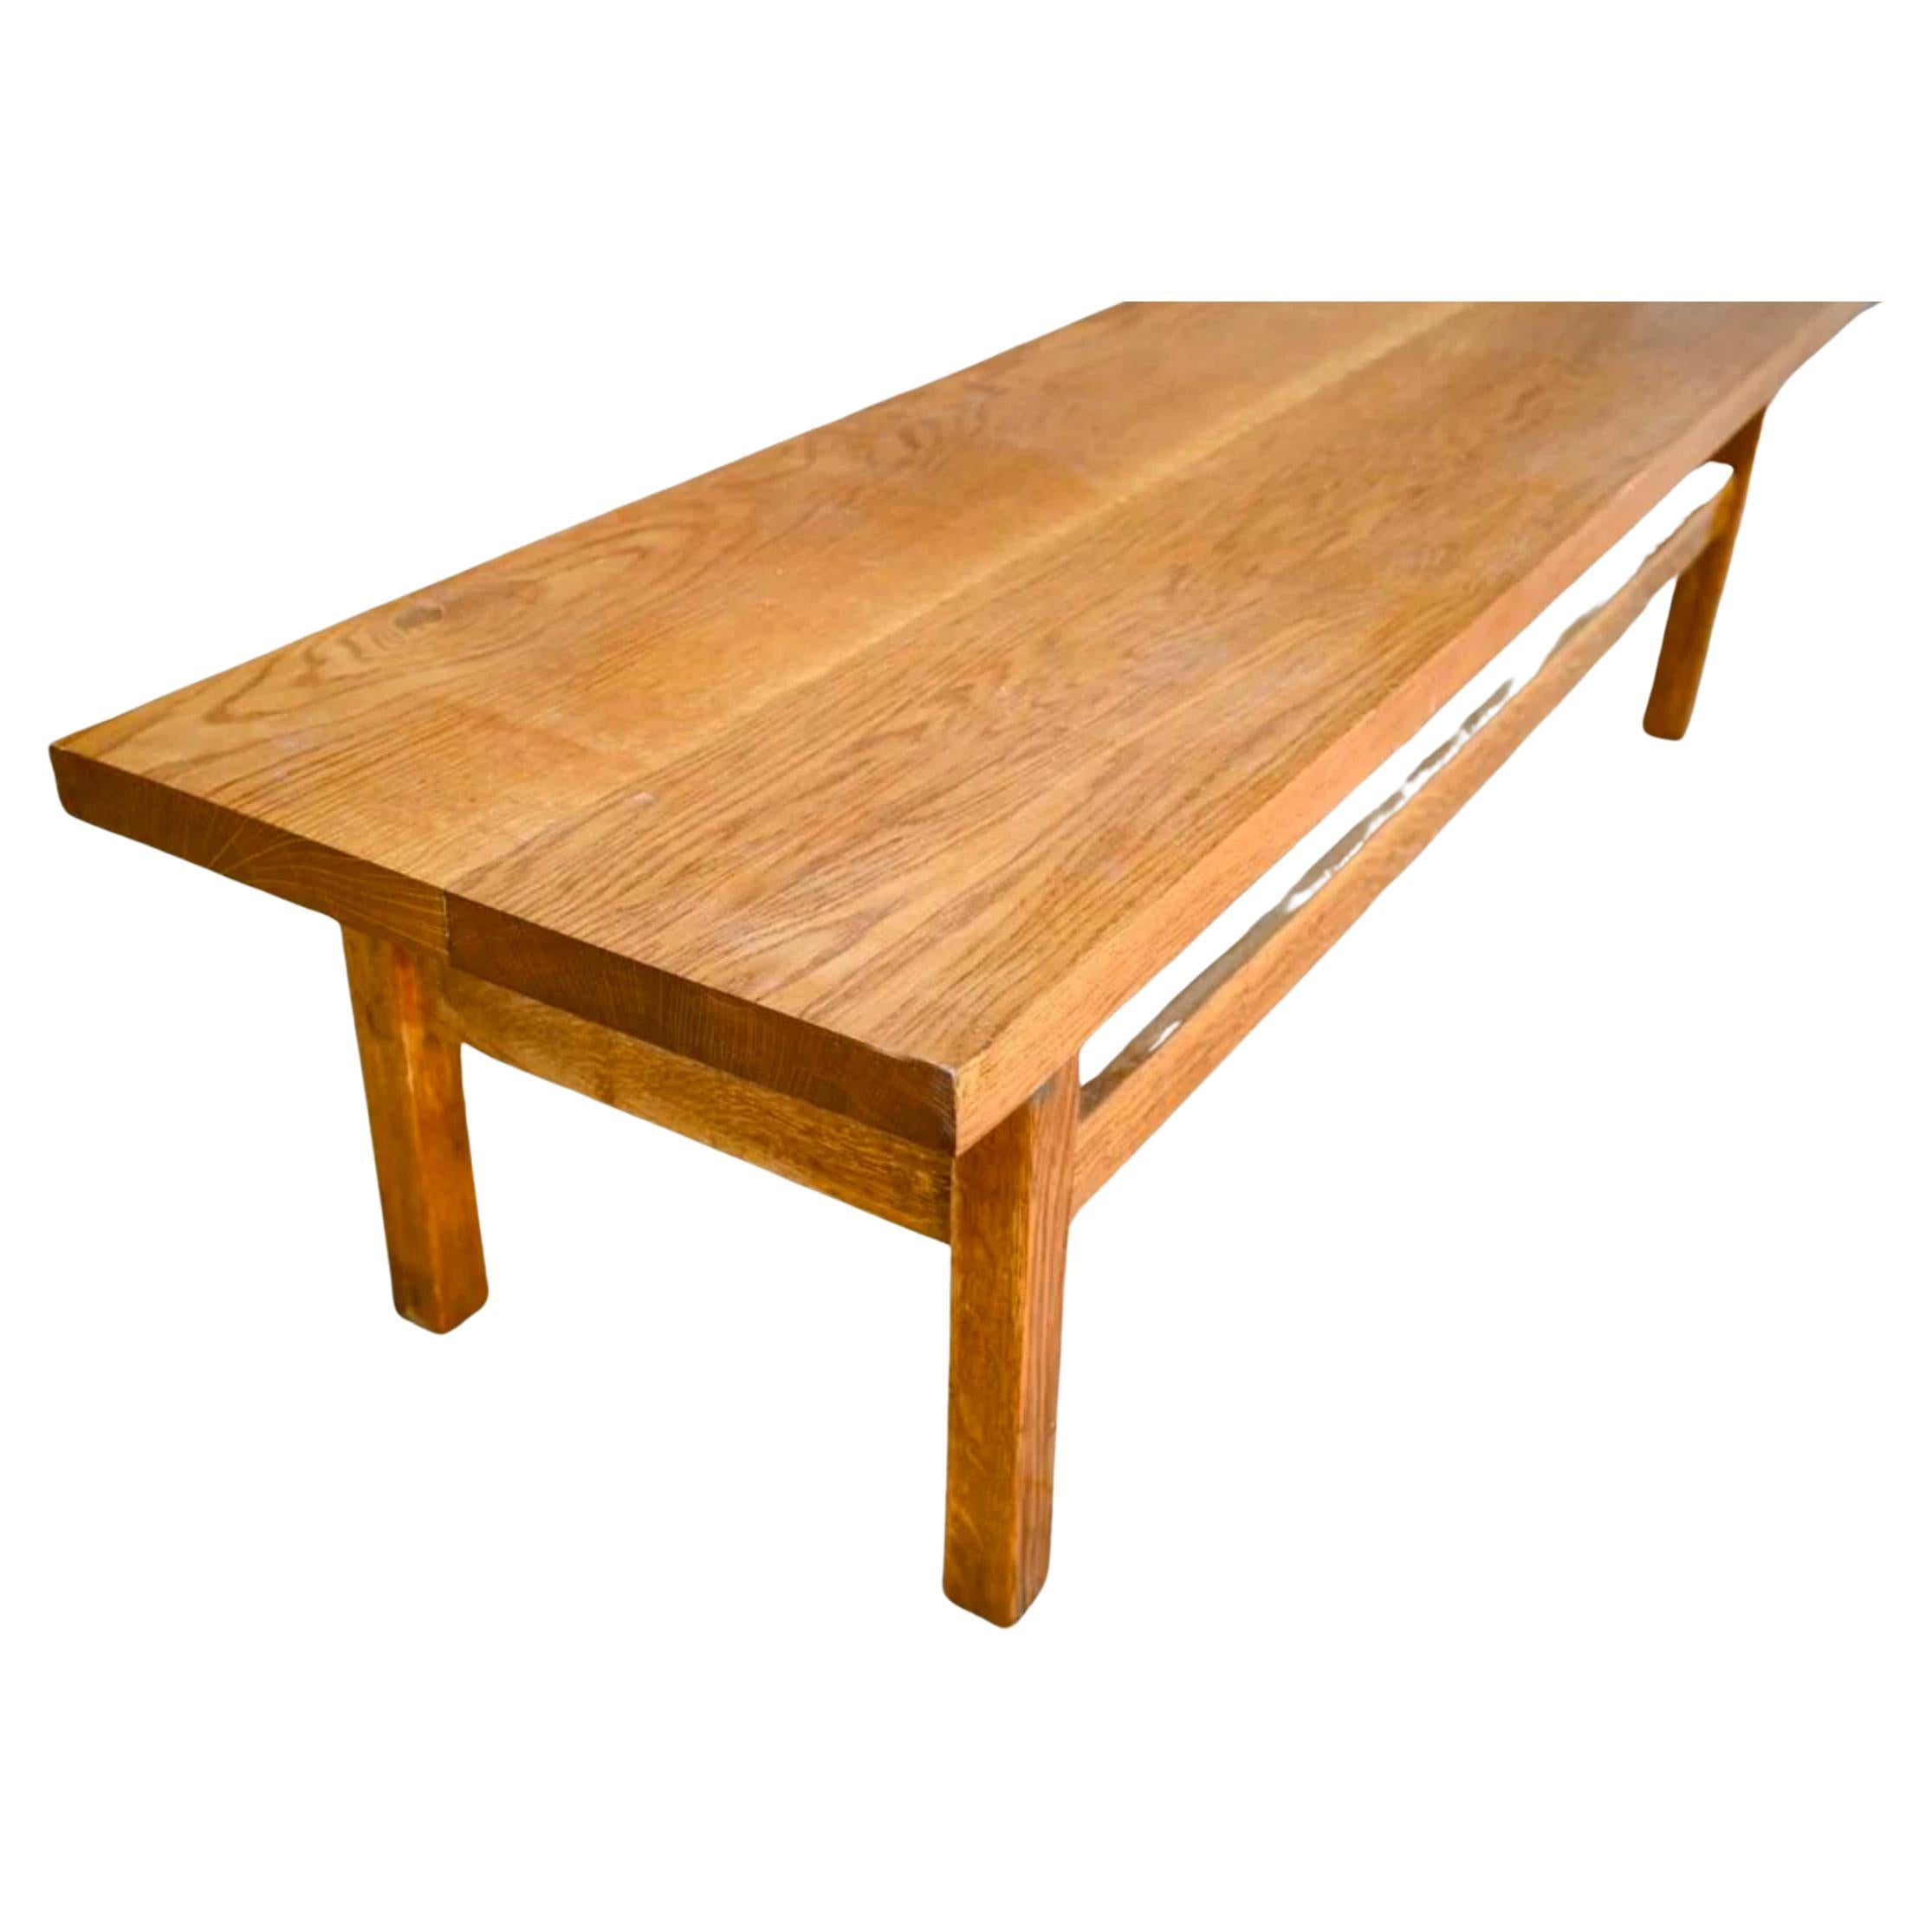 Beautiful mid century solid oak 10' long bench. beautiful Oak. Mid century American Studio craft. All solid Oak. Very minimalist design. Very heavy and solid bench. No signatures or marks. Circa 1960 located in Brooklyn NYC

118